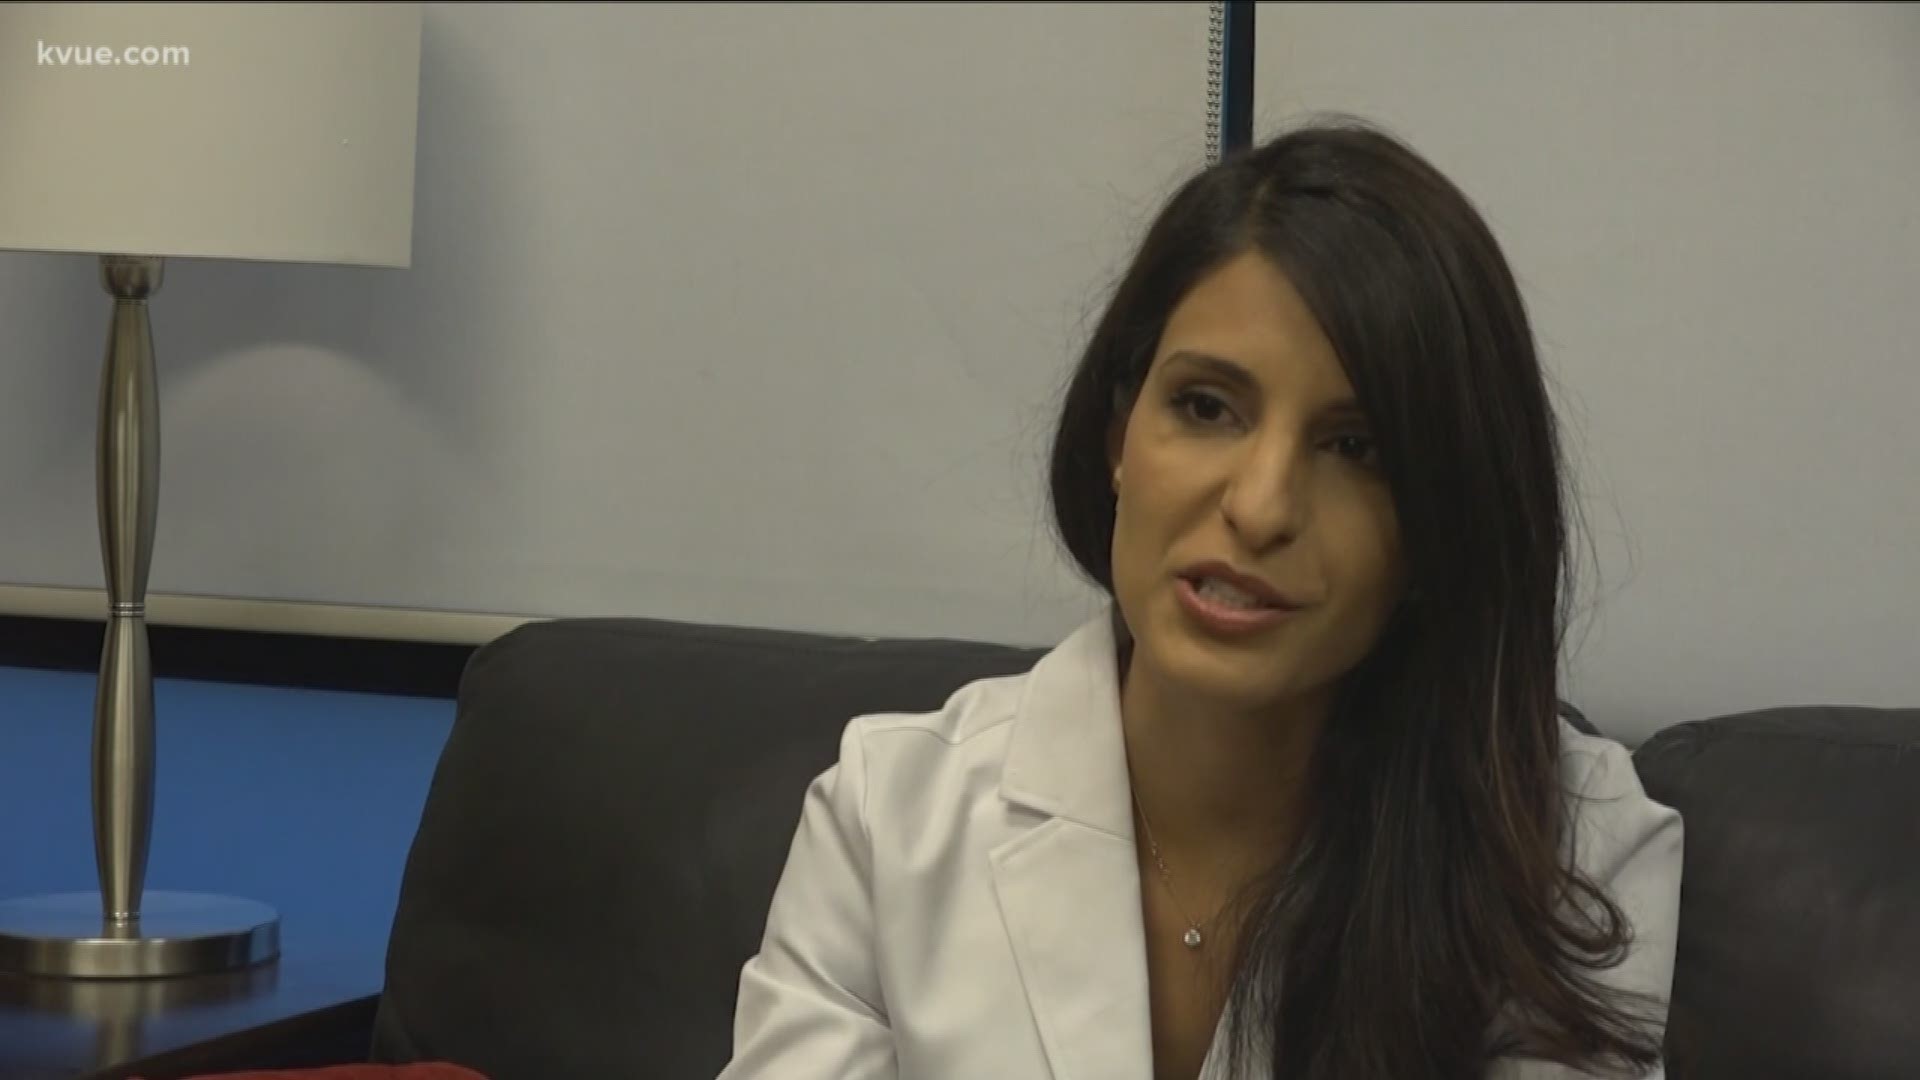 Dr. Natasha Kathuria, an ER doctor at Austin Emergency Center, answers some questions about the spread, containment and response to COVID-19.